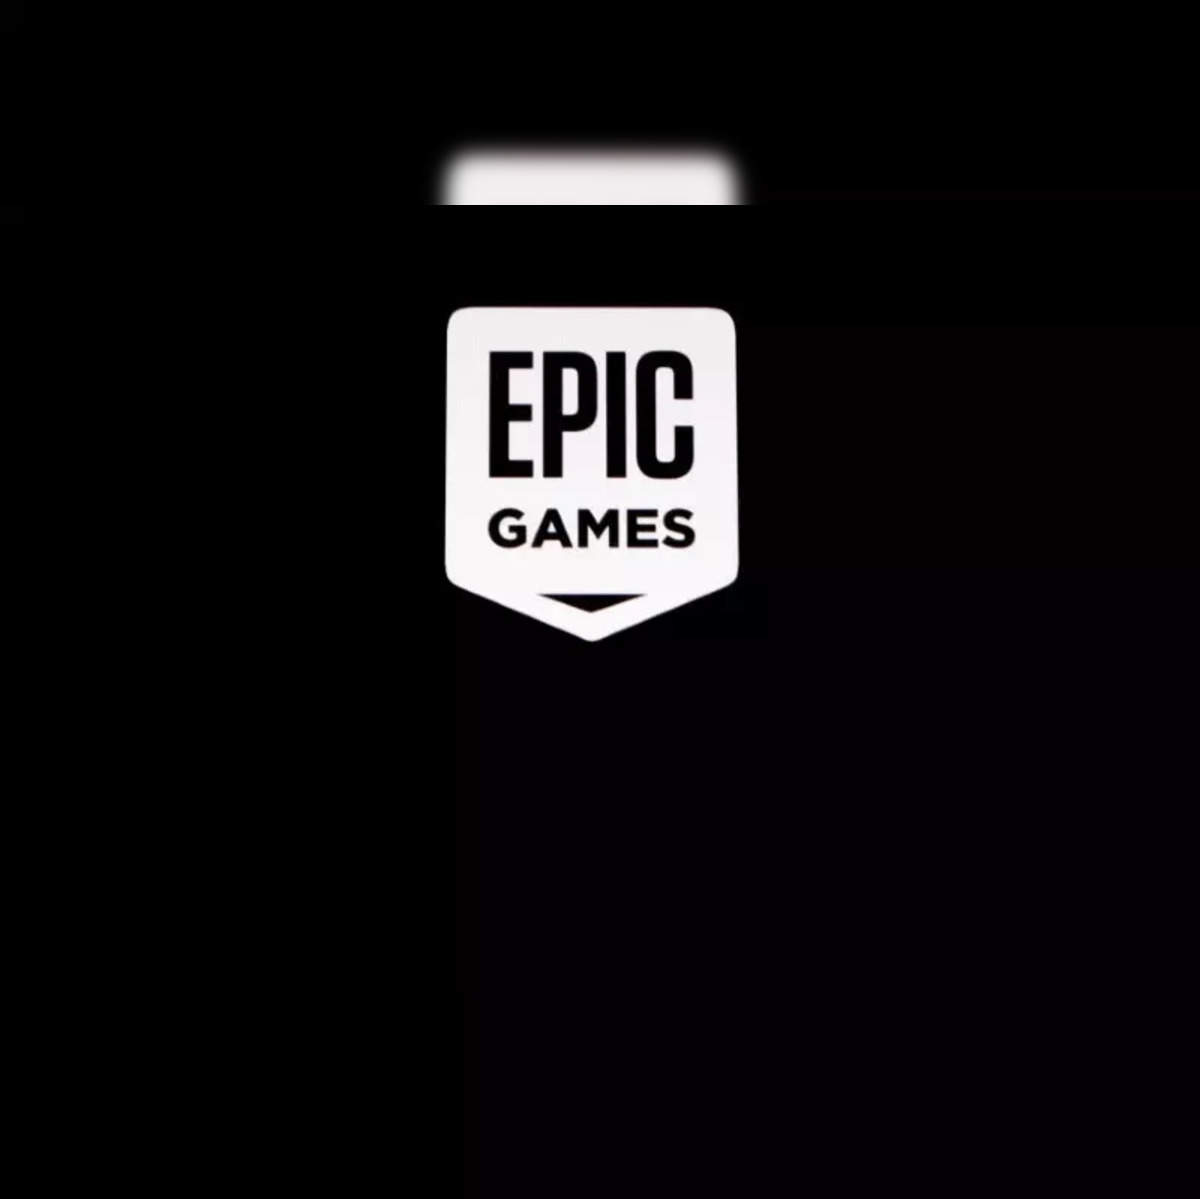 Get 15 games for free from the Epic Games Store starting at midnight